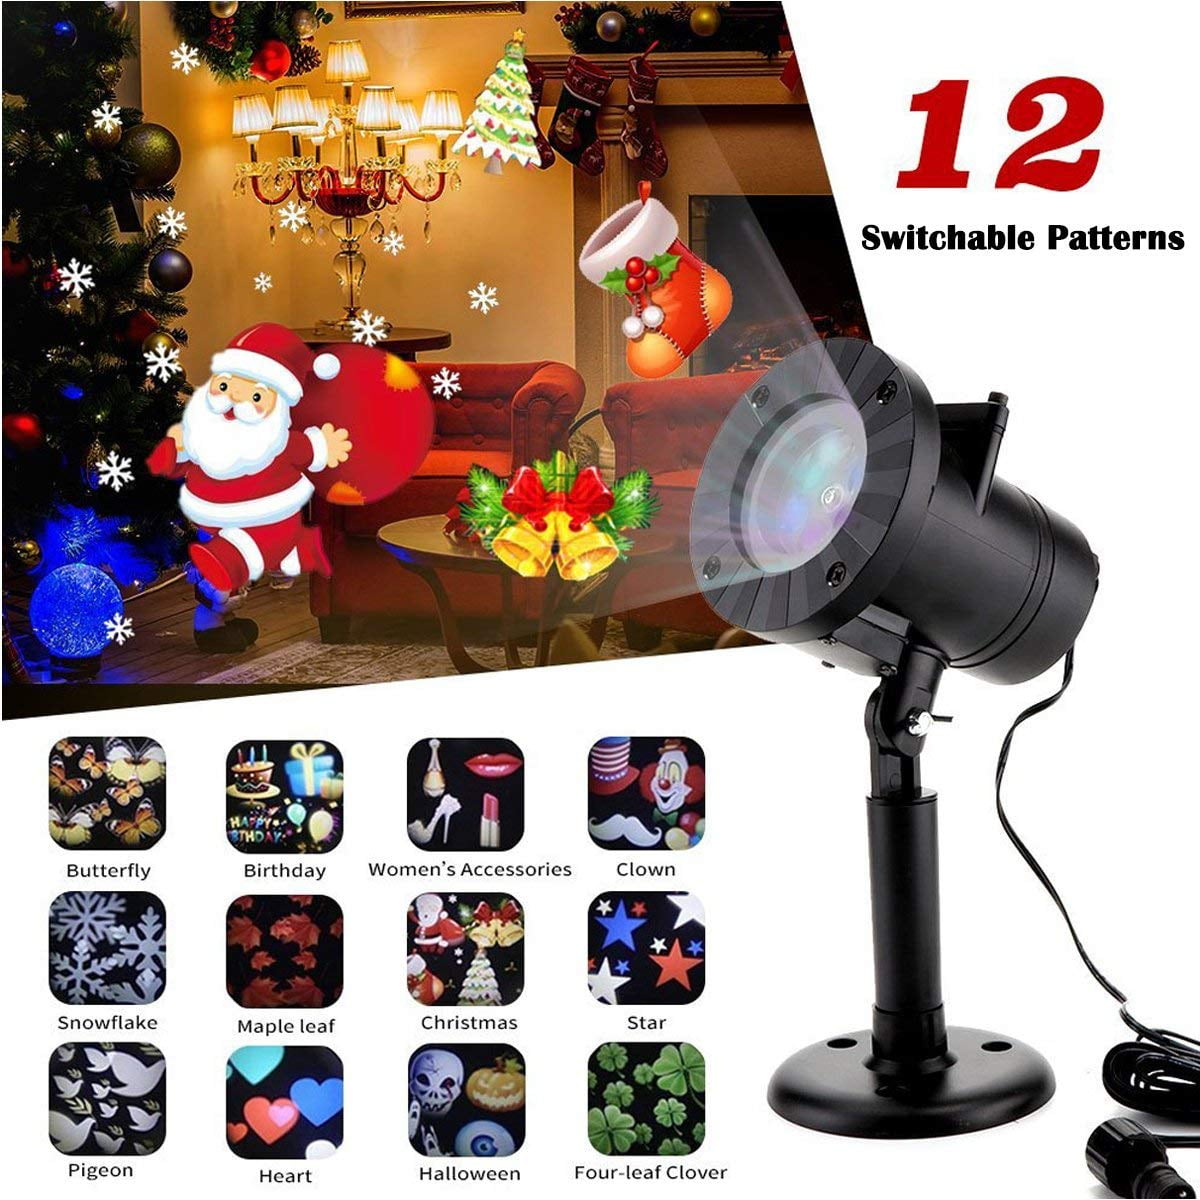 Details about   Christmas LED Projection Lamp Light Projector 12 Pattern Party Lights 3 Types US 